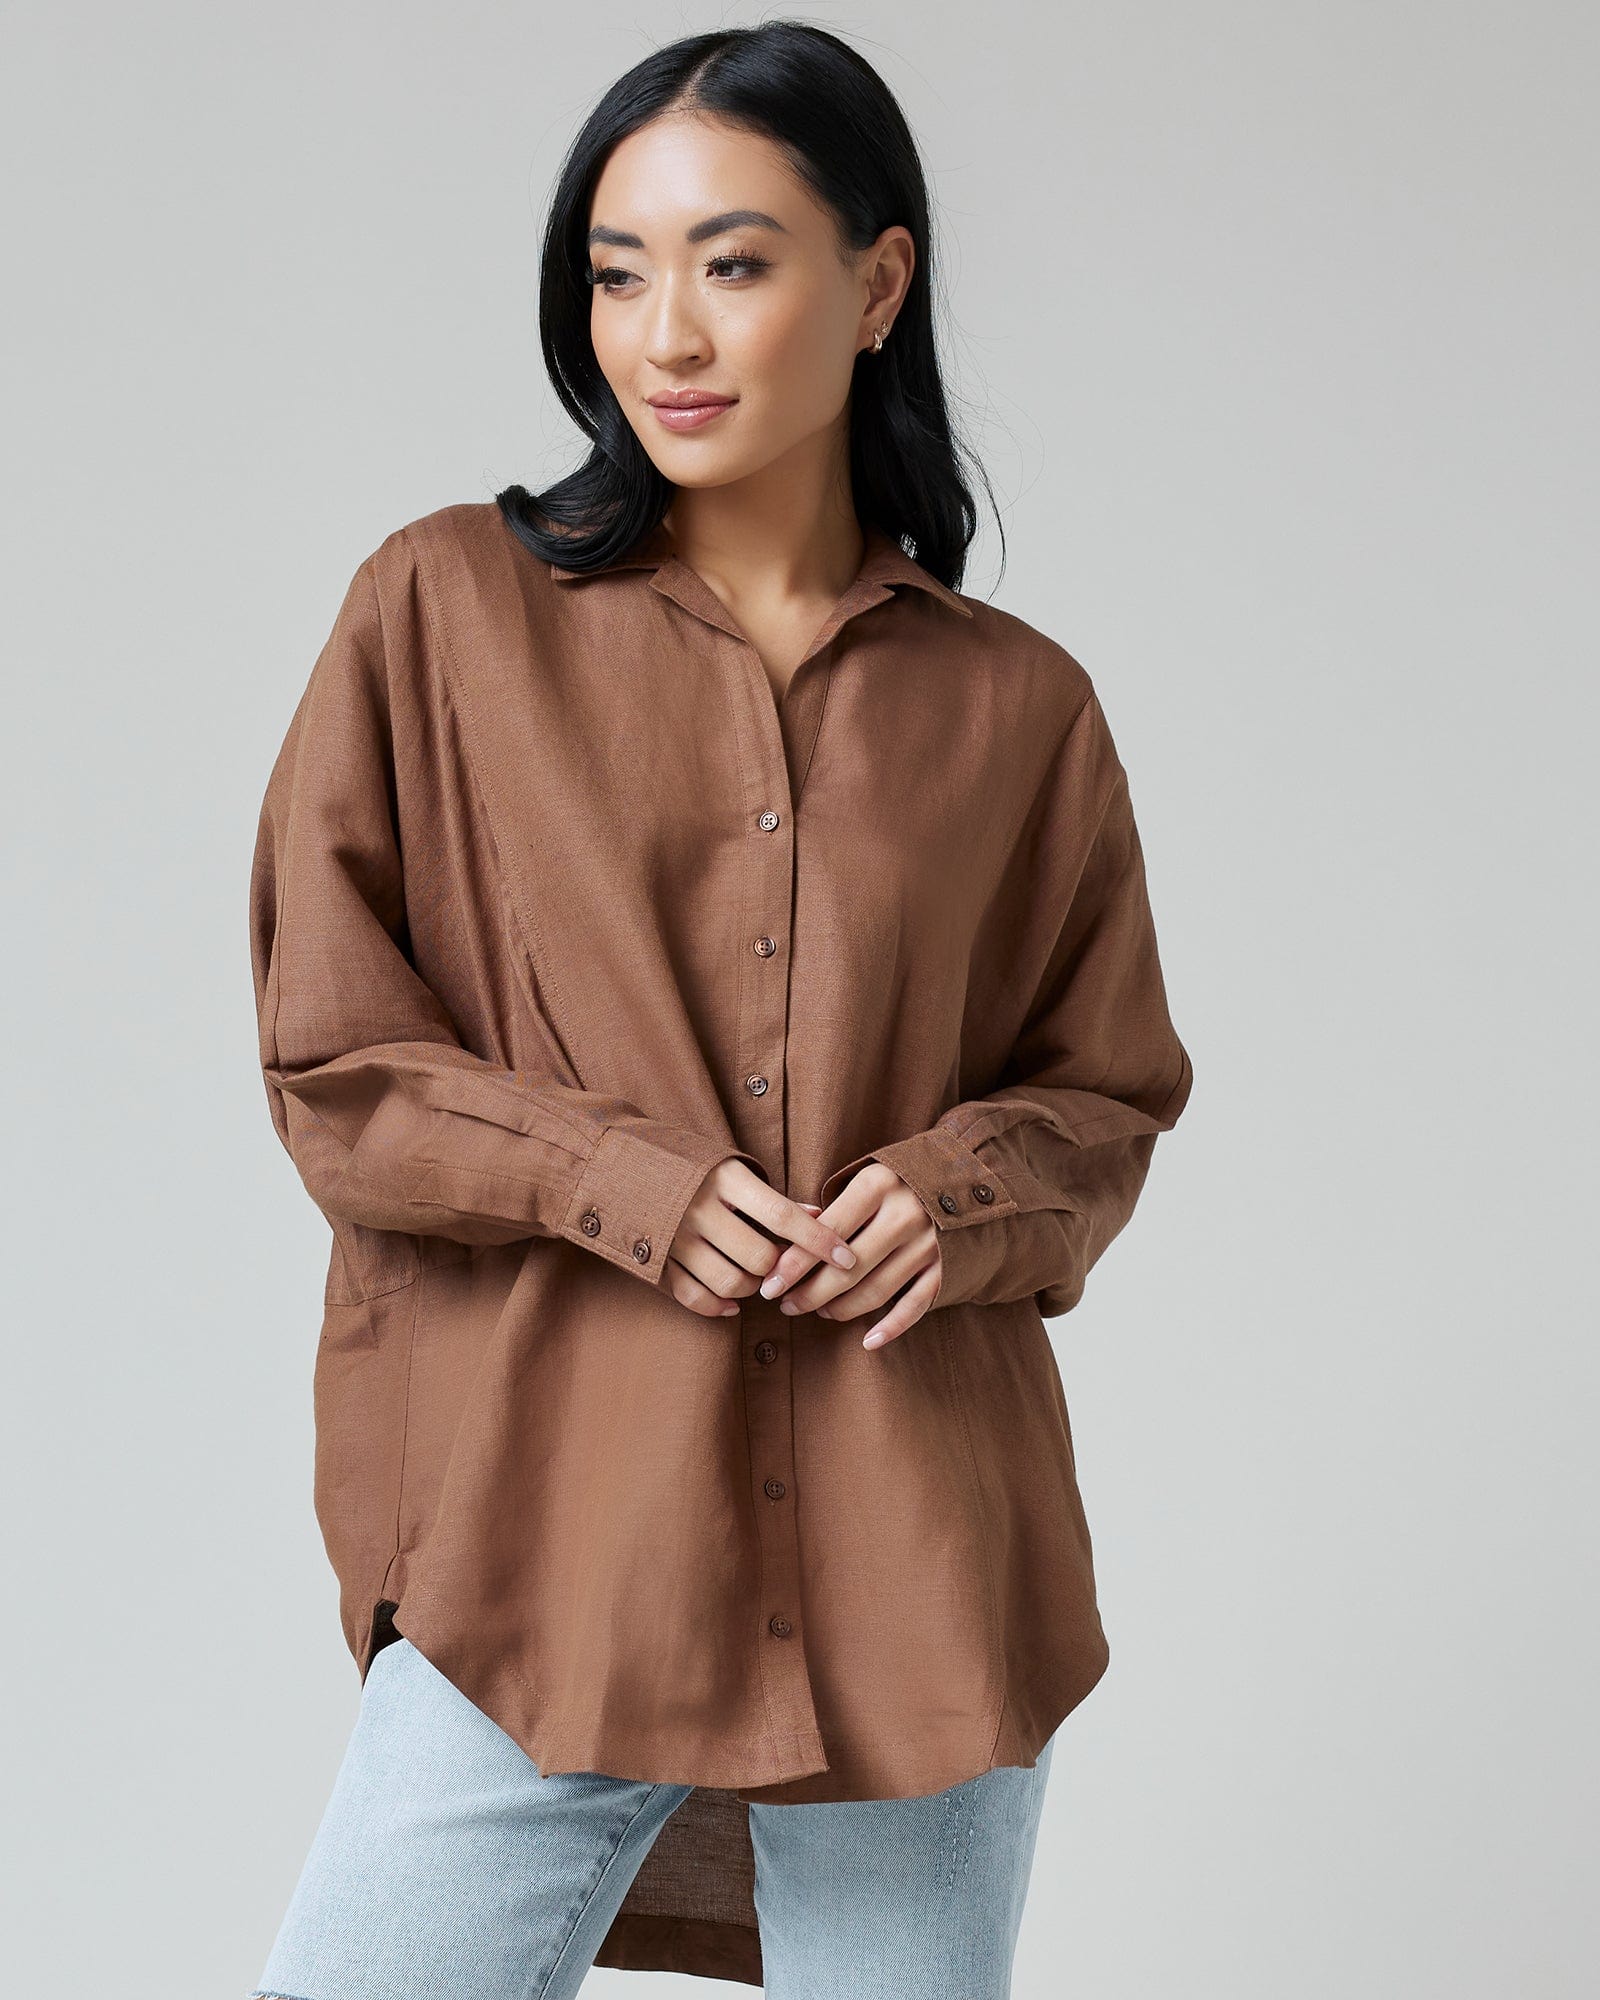 Woman in a brown oversized long sleeve button-down